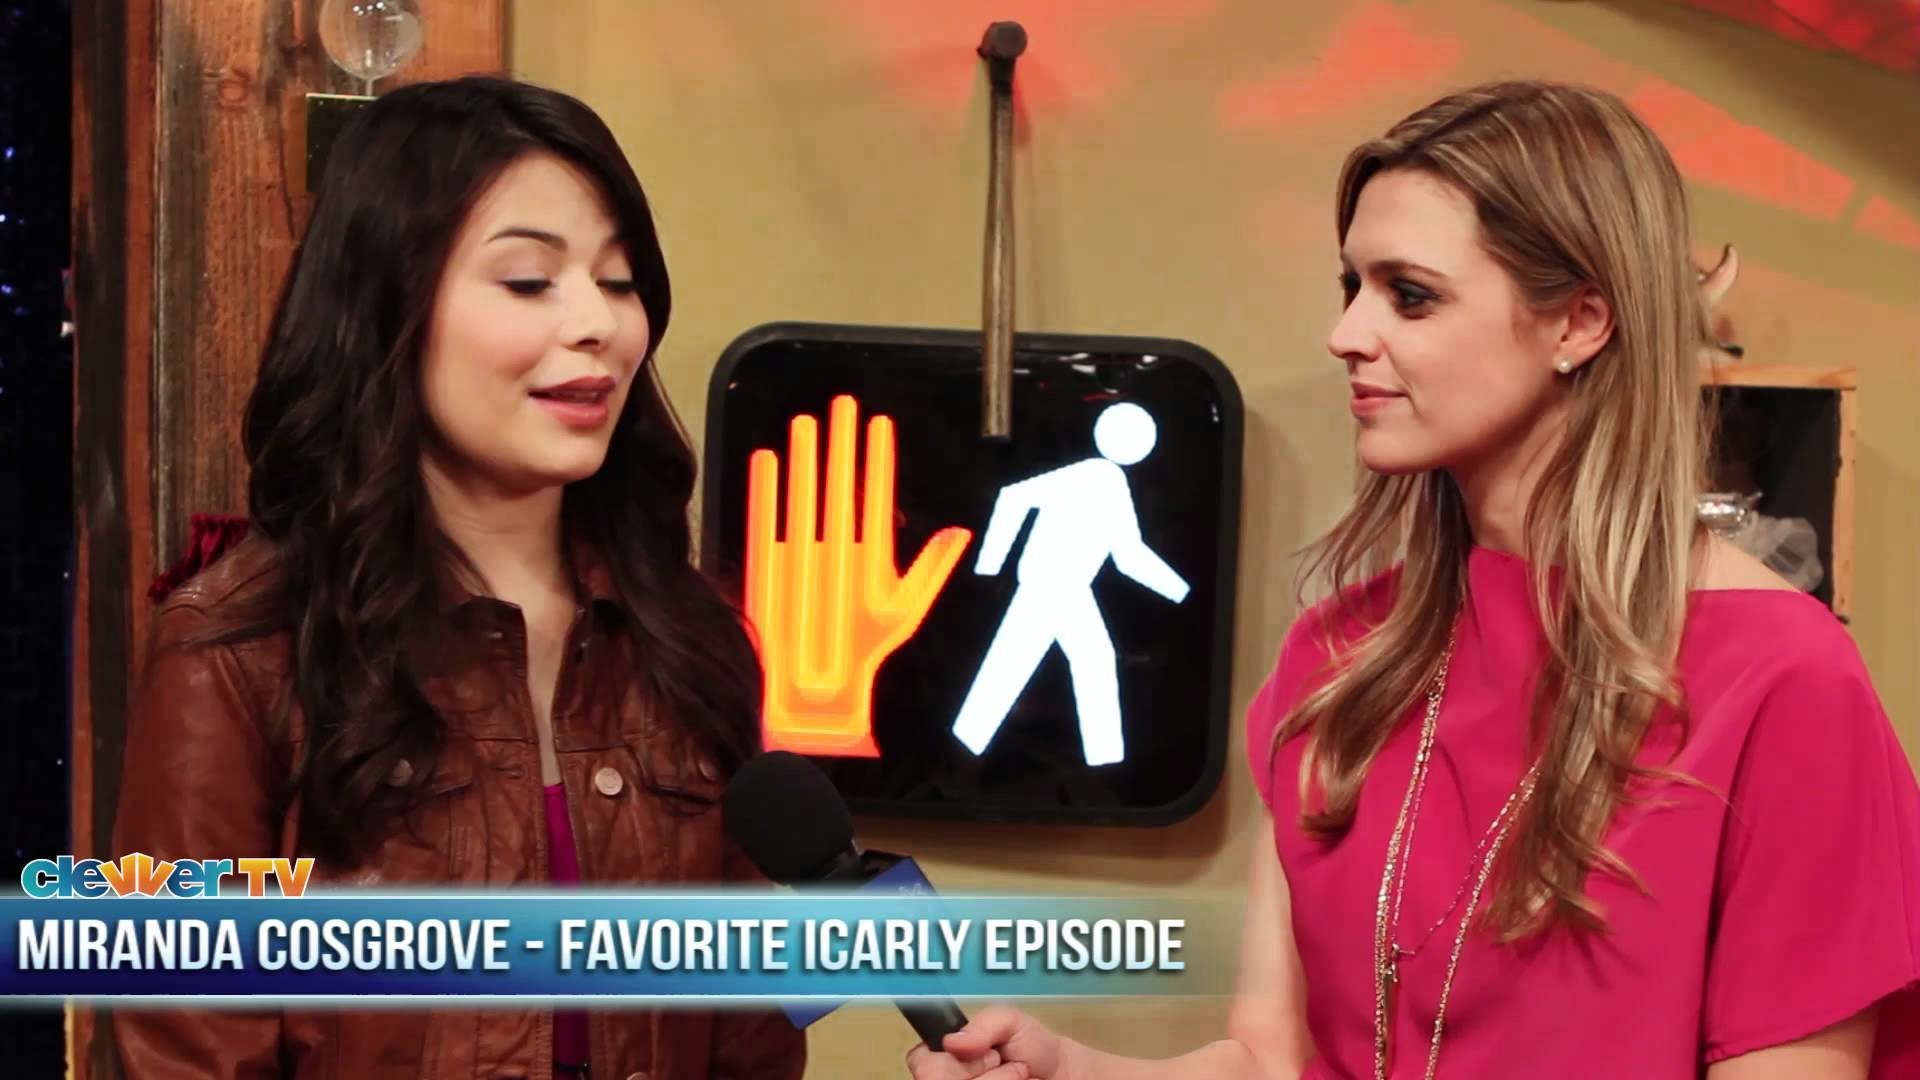 1920x1080 "iCarly" Cast Reveals Favorite Episodes - Miranda Cosgrove, Jennette  McCurdy - YouTube